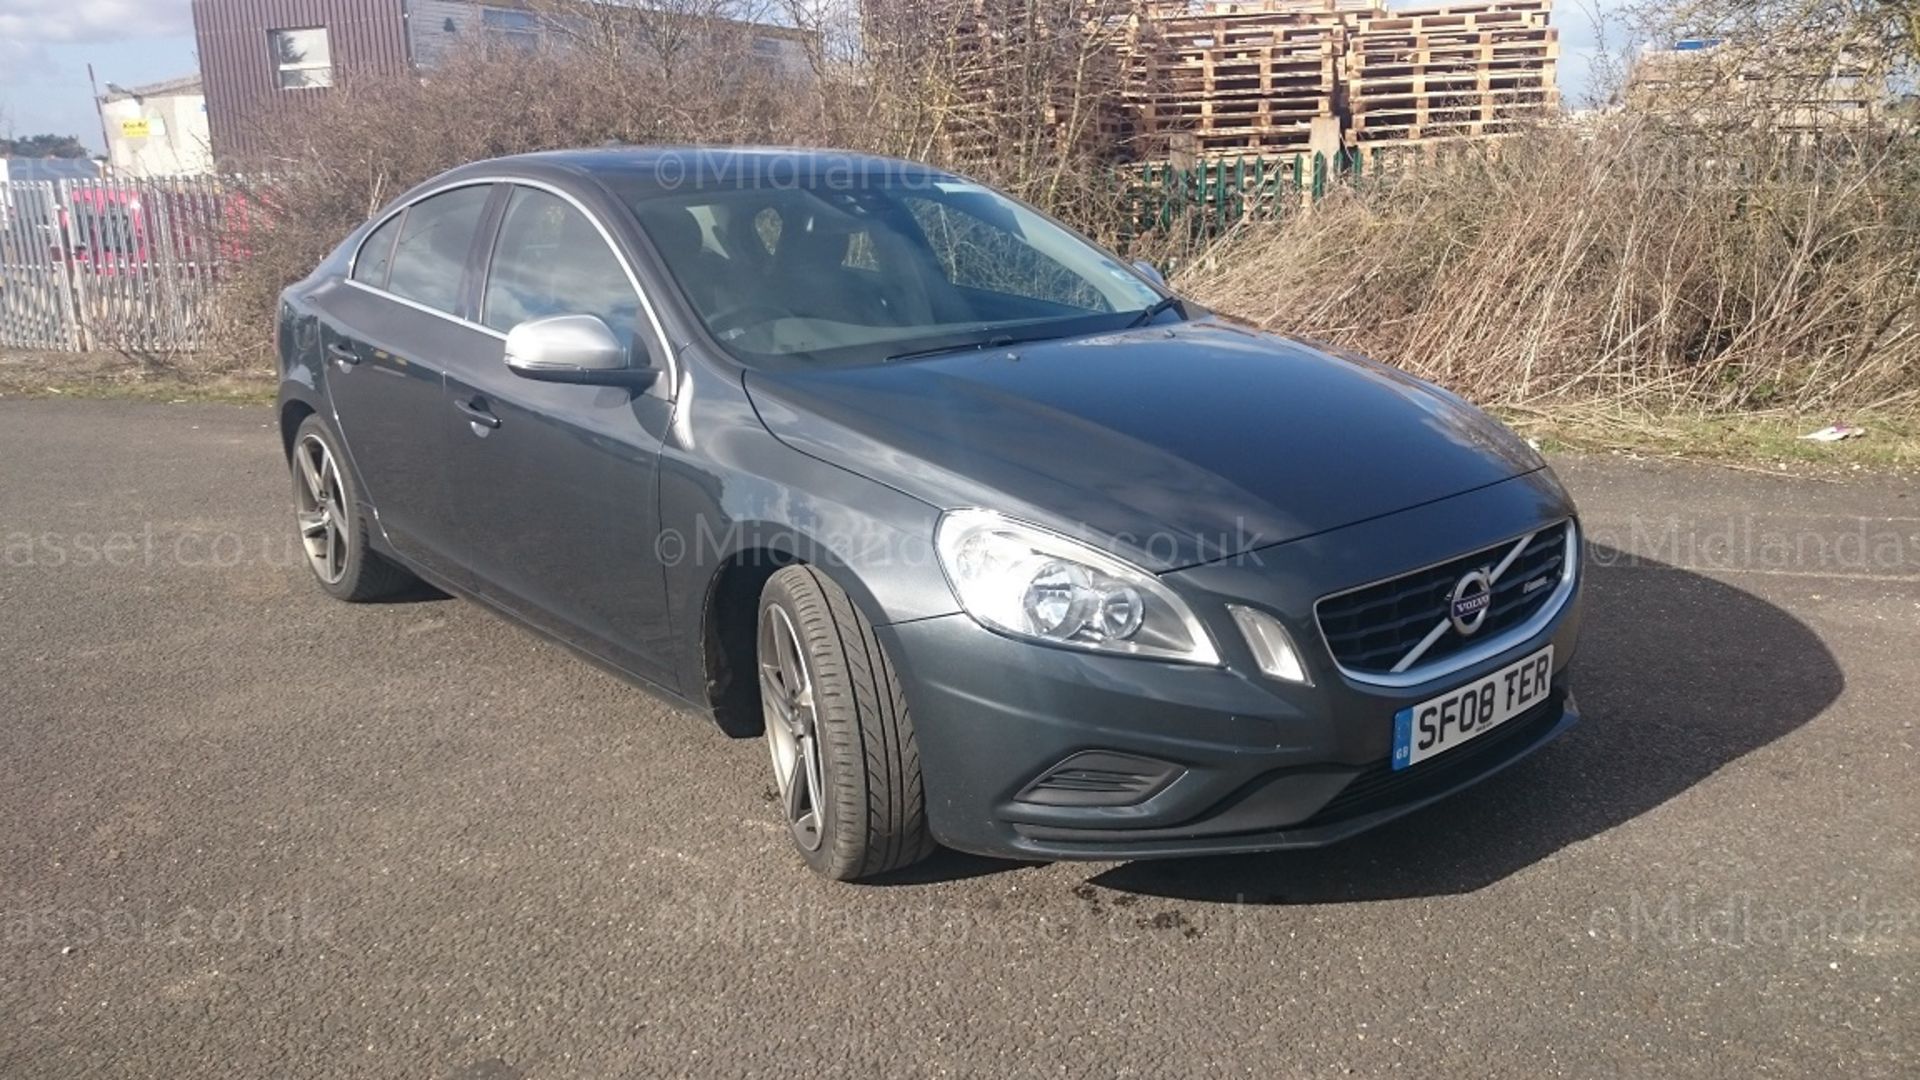 2011/11 REG VOLVO S60 R-DESIGN D5 215 BHP GEARTRONIC AUTO ONE OWNER FULL SERVICE HISTORY *NO VAT*